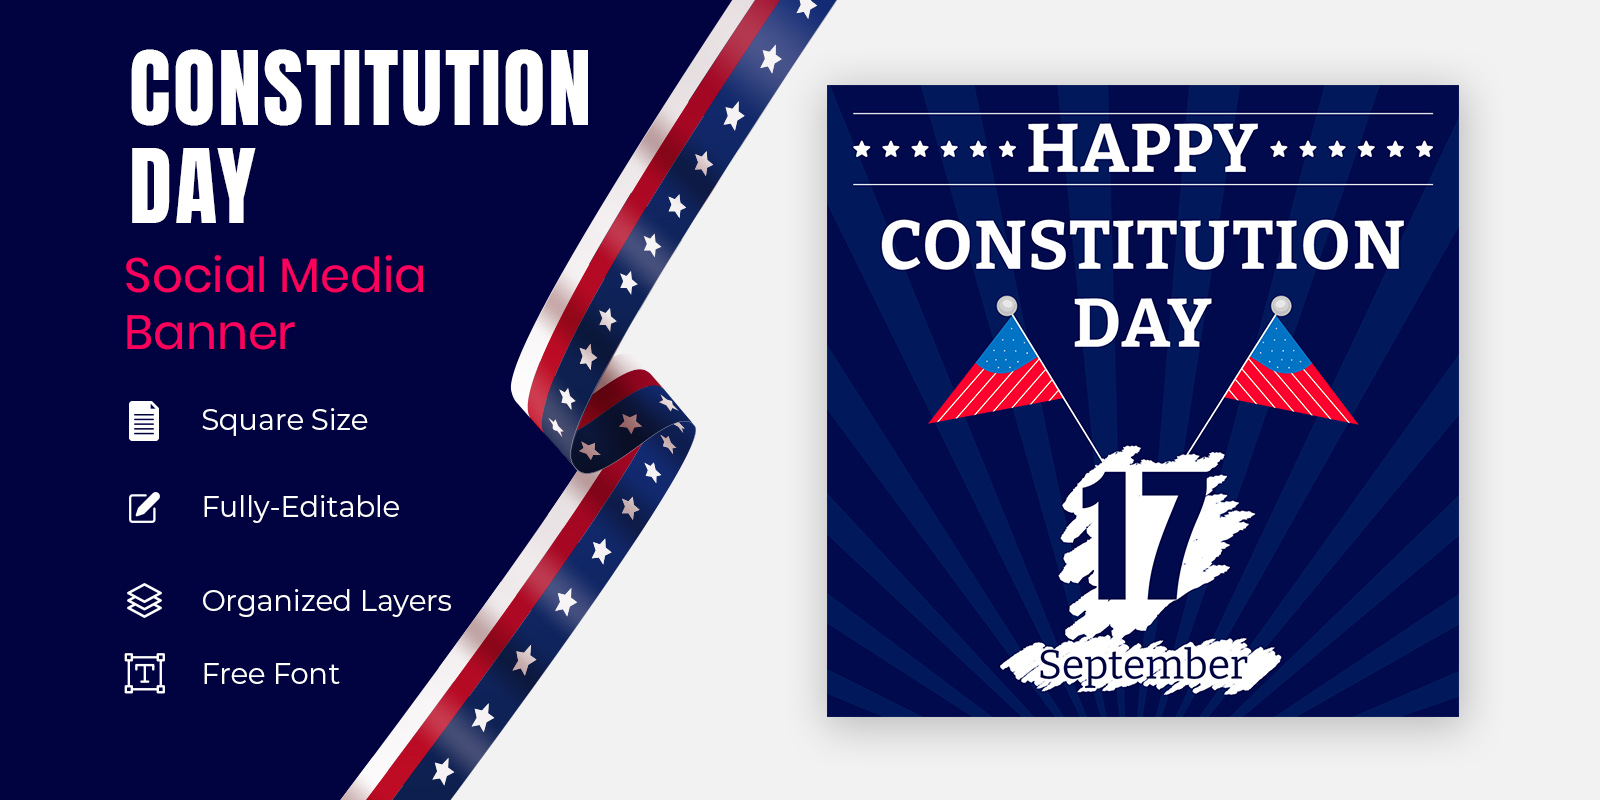 Constitution Day In United States Celebrate Annual In September 17 Social Banner Design